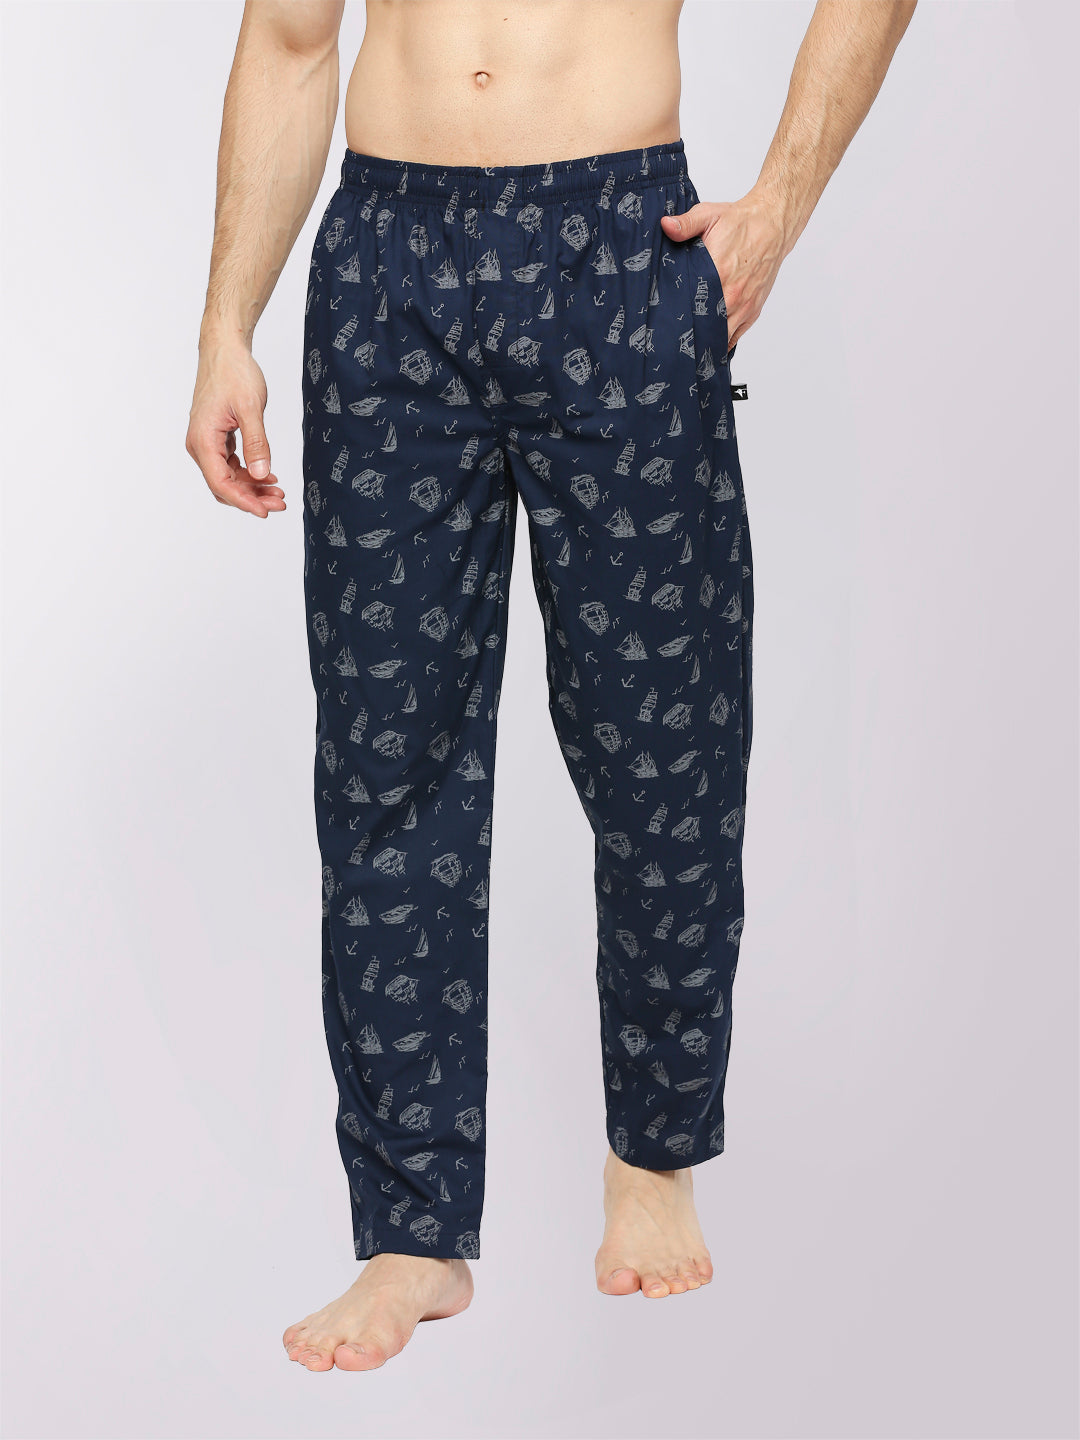 Buy U.S. Polo Assn. Comfort Fit Check I659 Lounge Pants - Pack Of 1 (BLUE  BIG CHECK S) at Amazon.in